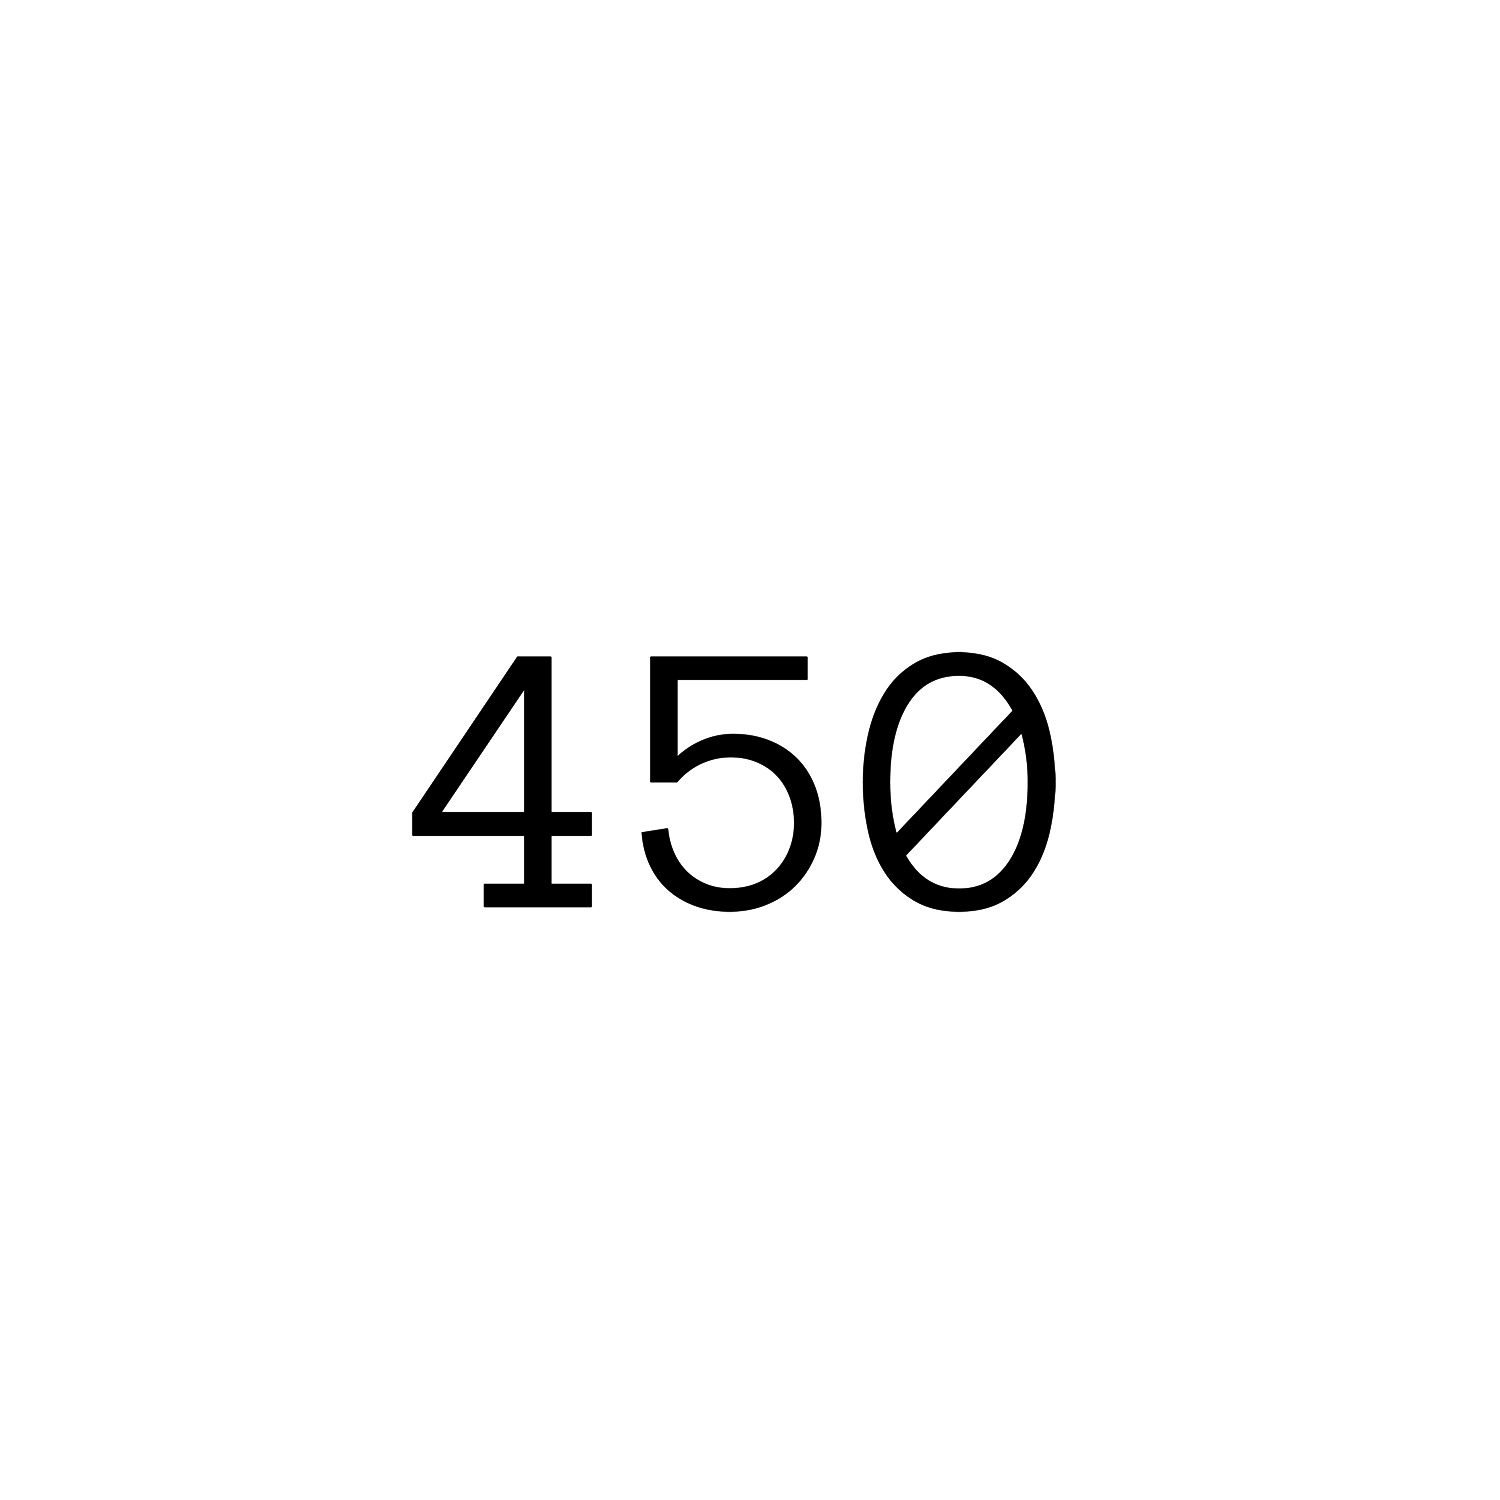 450-1500px.png